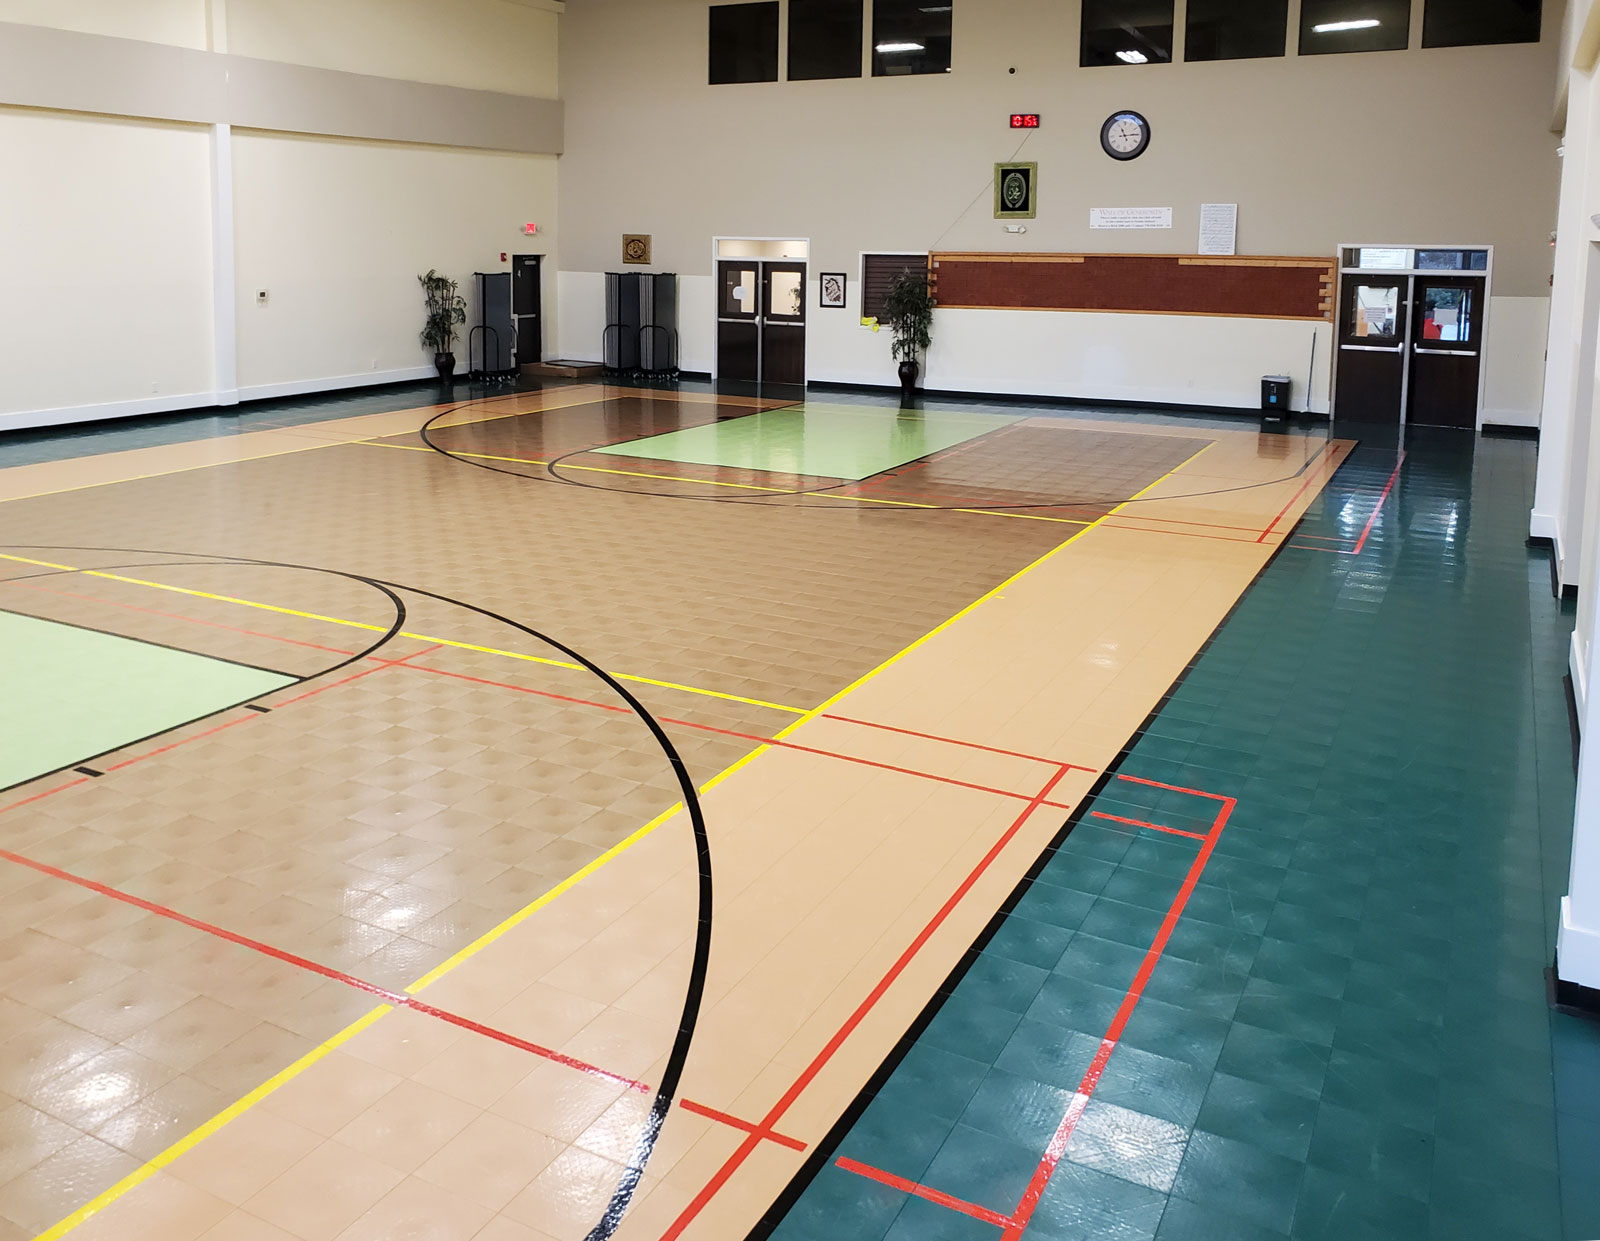 Indoor multi-court with various colors and sport lines